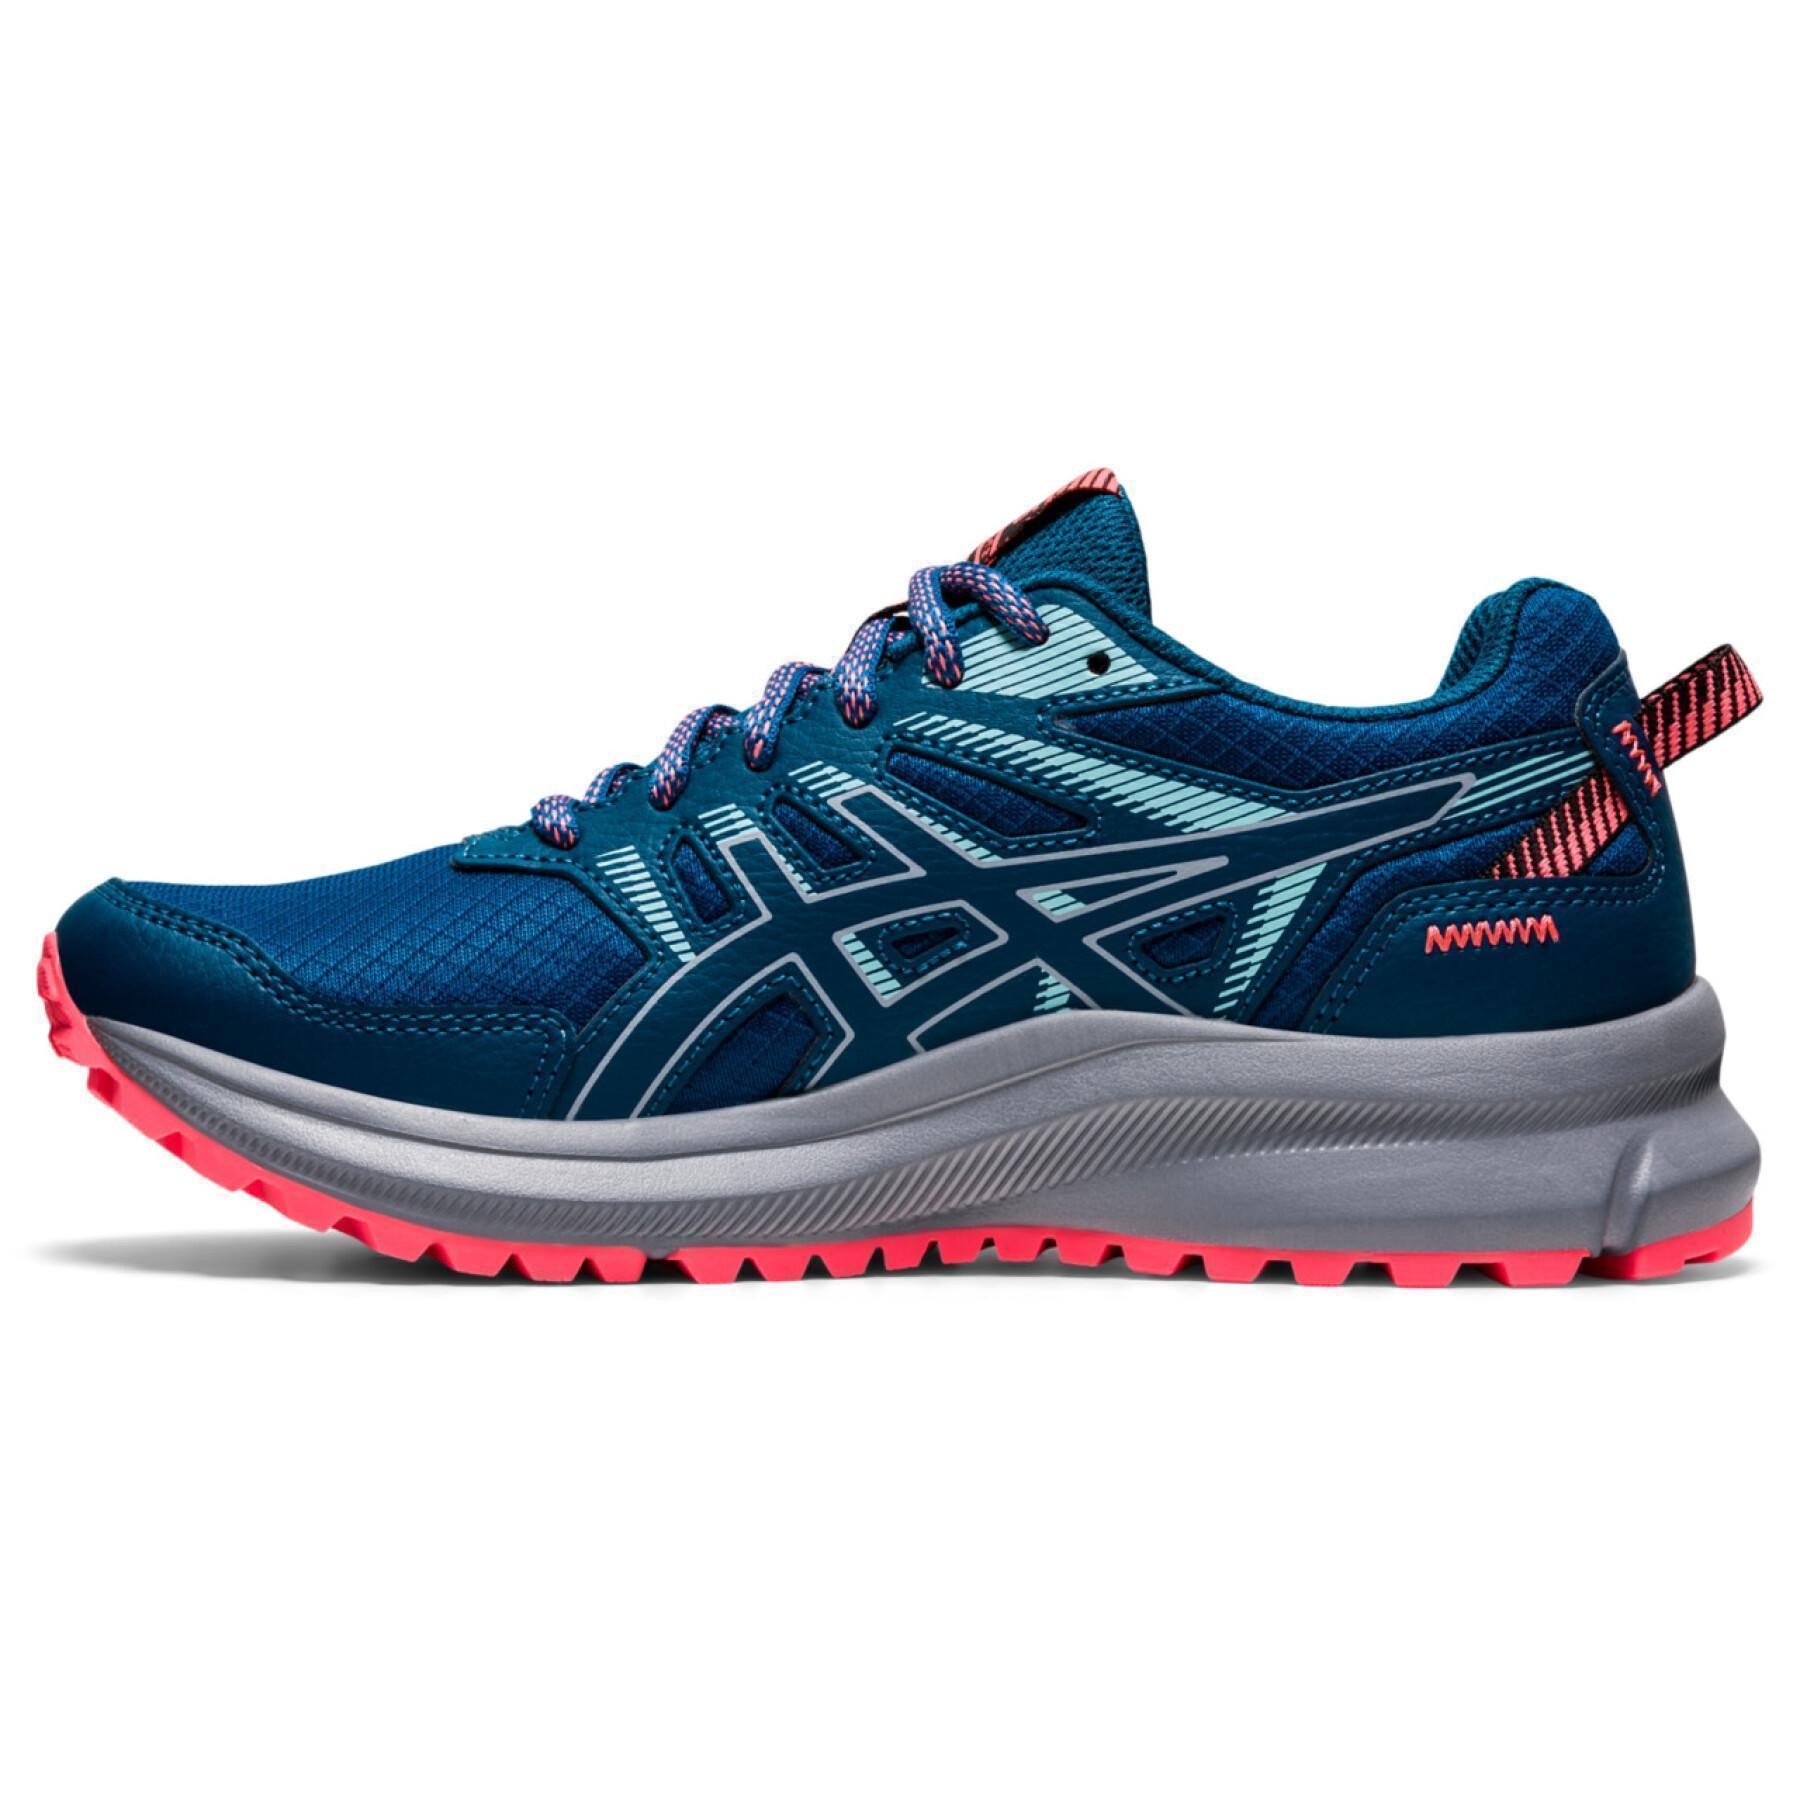 Chaussures femme Asics Trail Scout 2